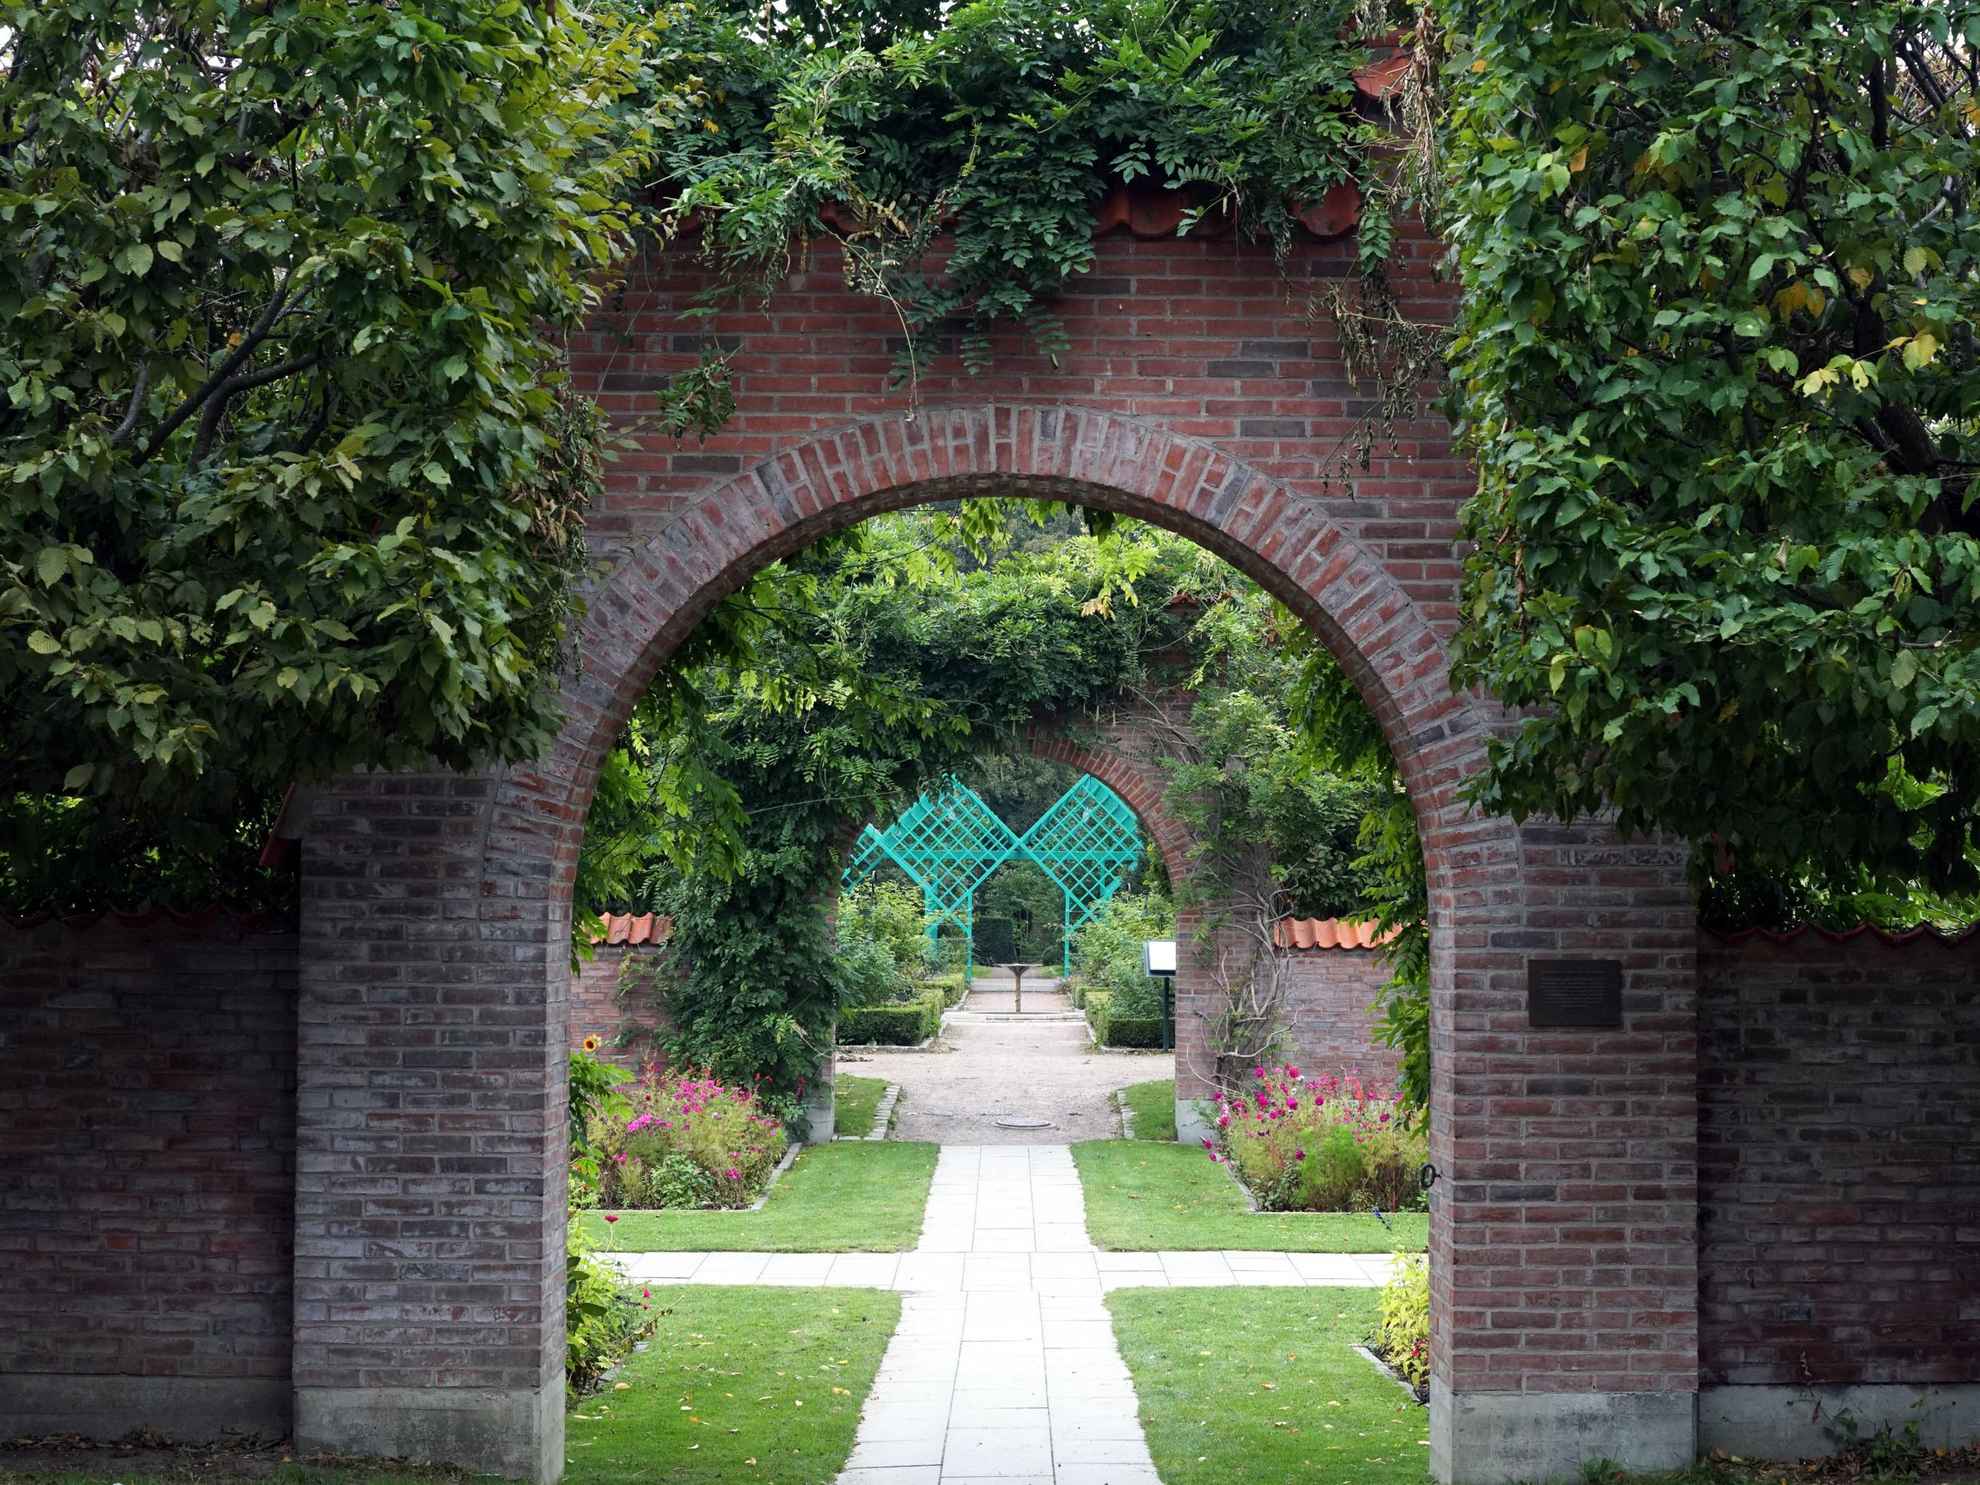 Inside a park, a walkway through two arches covered with greenery. There are beautiful plants and flowers. At the end of the road you see a blue square construction.